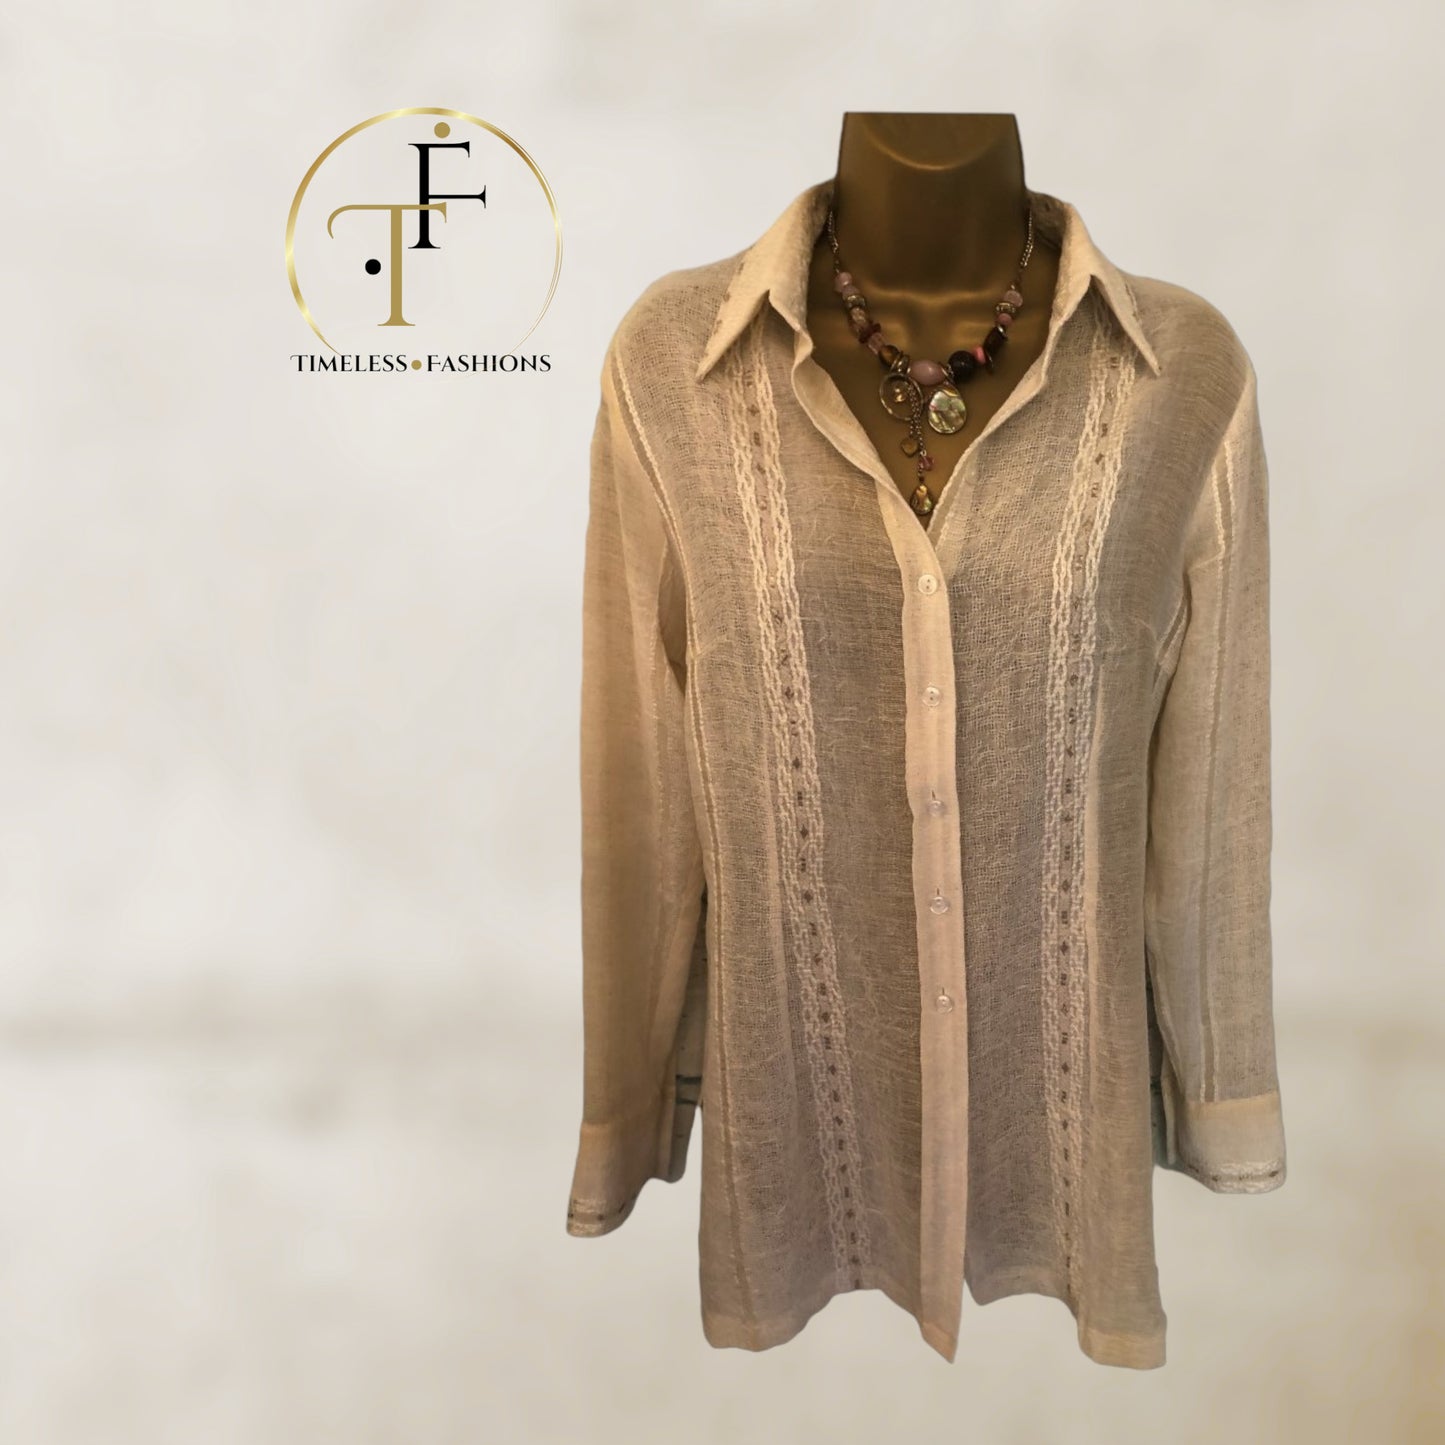 Aria Womens Clotted Cream Textured Long Sleeve Blouse UK 14 US 10 EU 42RRP £39.00 Timeless Fashions